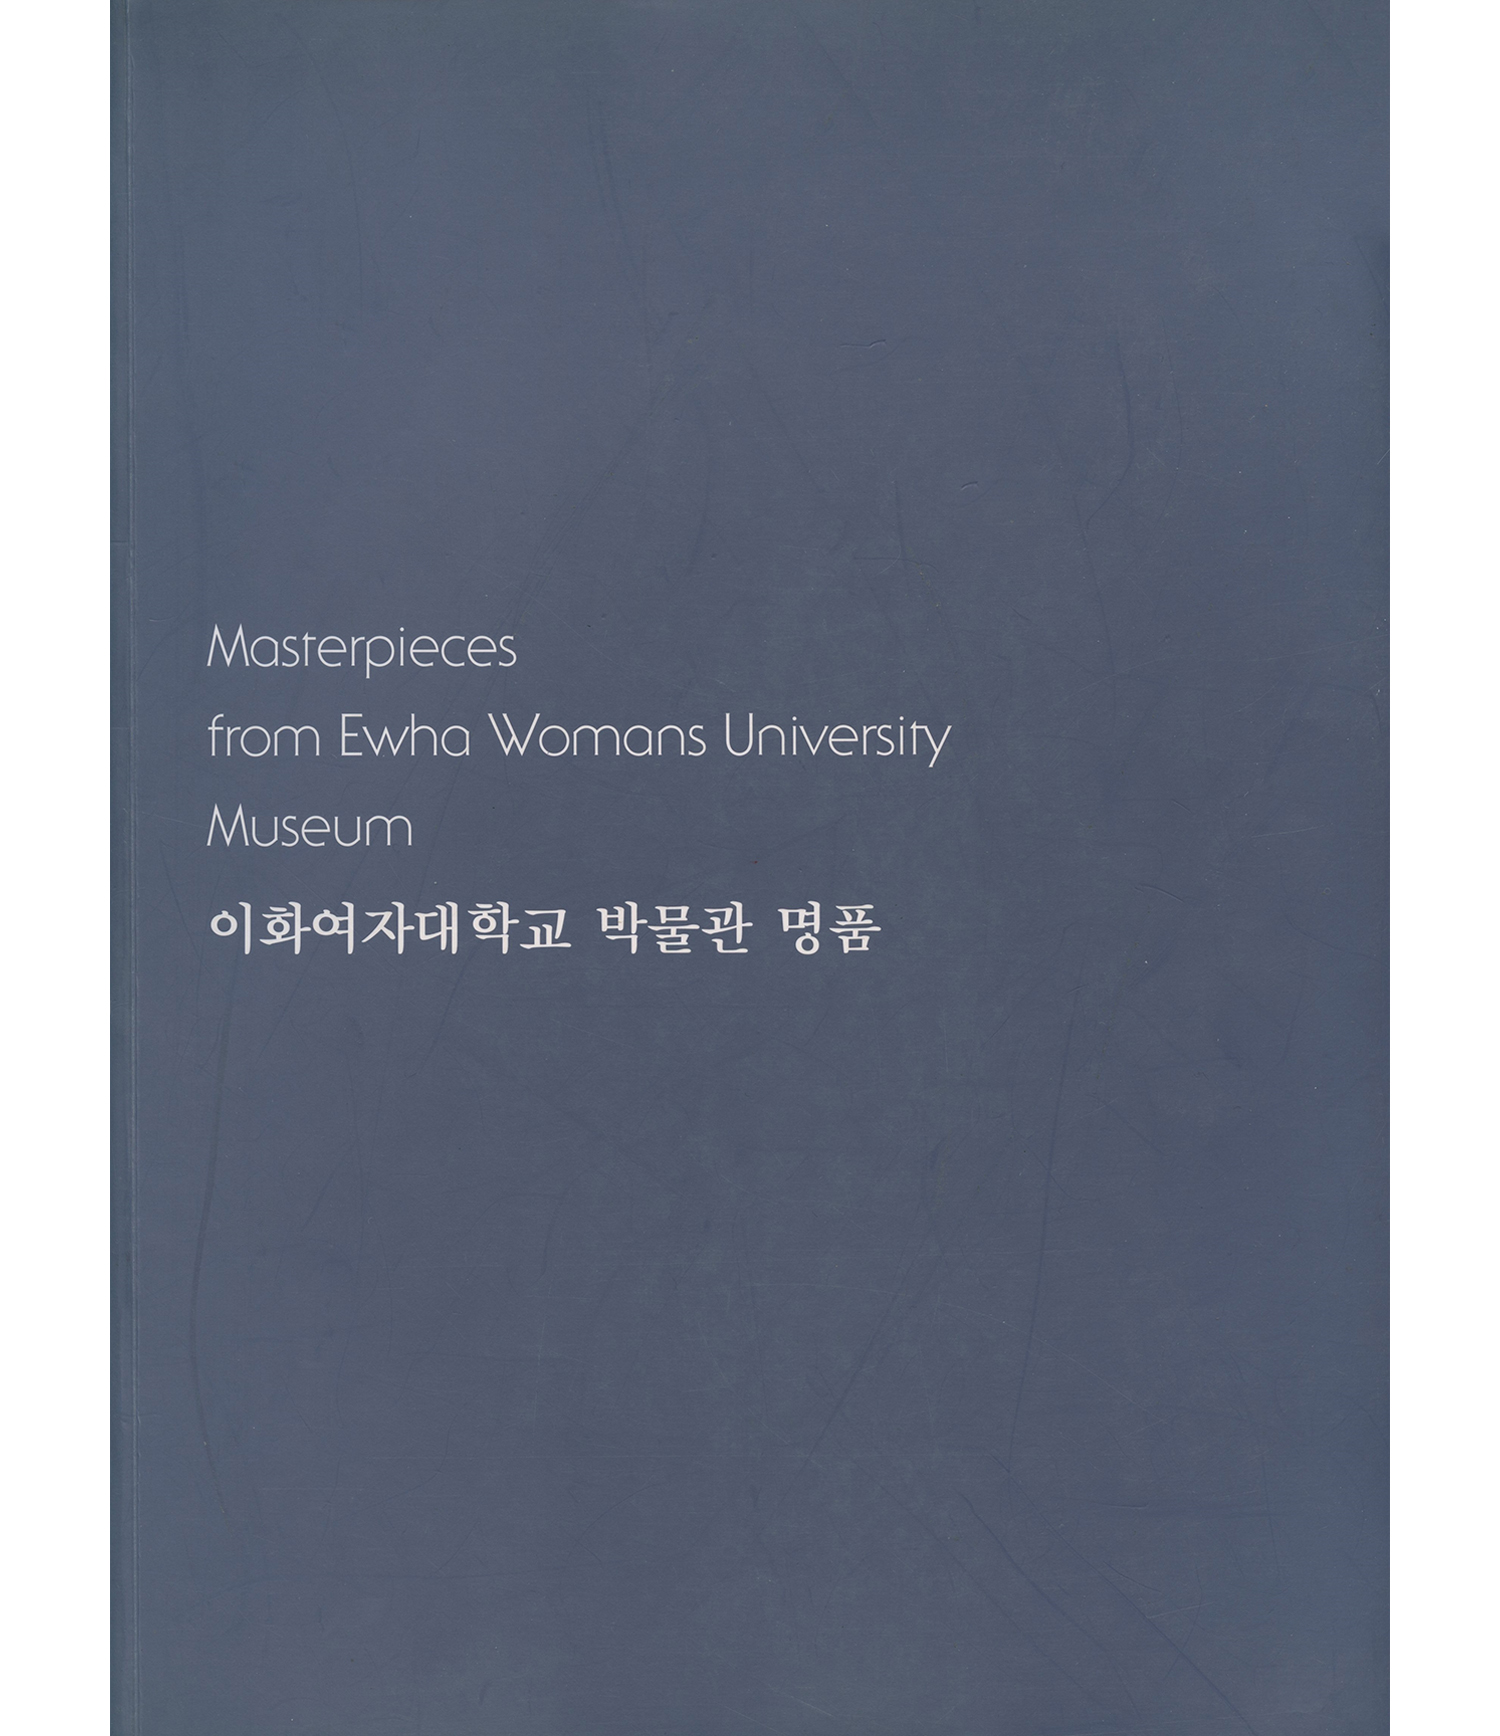 Masterpieces from Ewha Womans University Museum